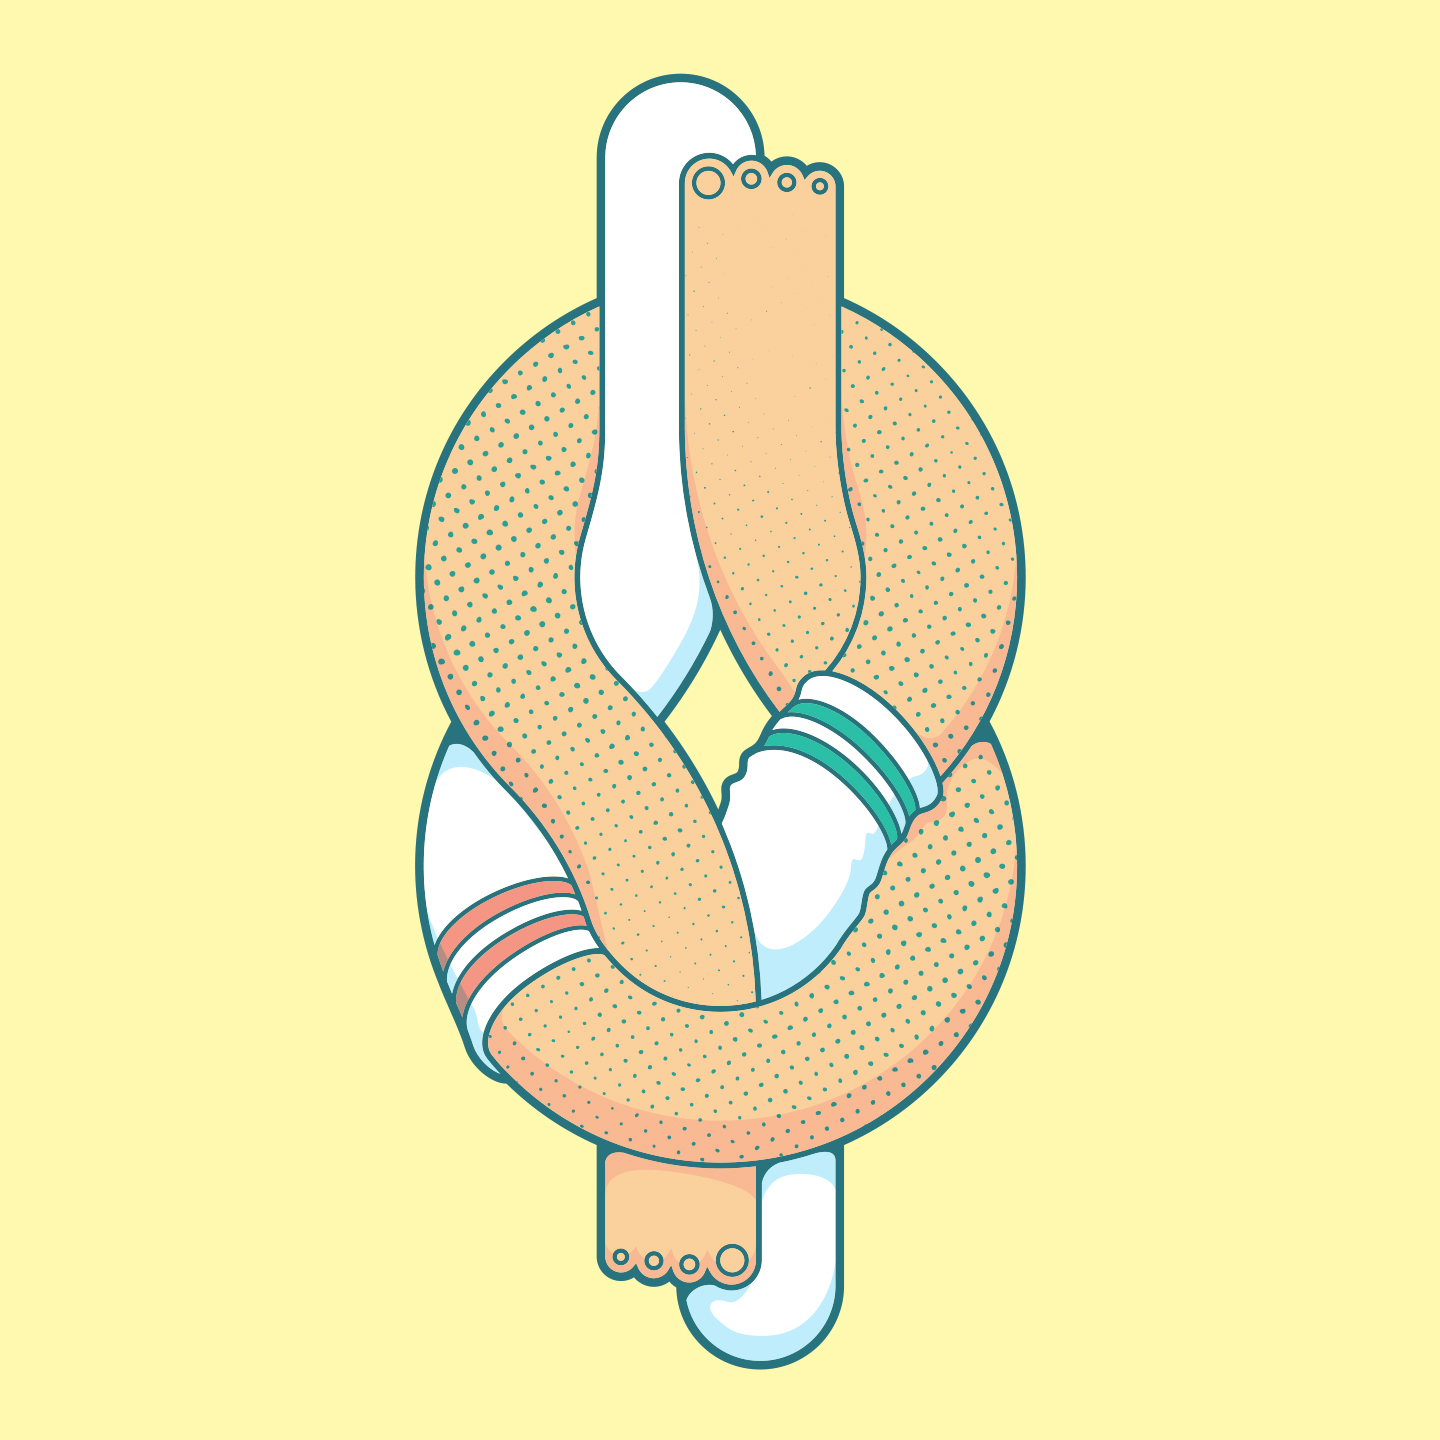 illustration_andre_levy_zhion_vector_pop_body_language_knot_gay_whitesocks_tie_topbtm.jpg